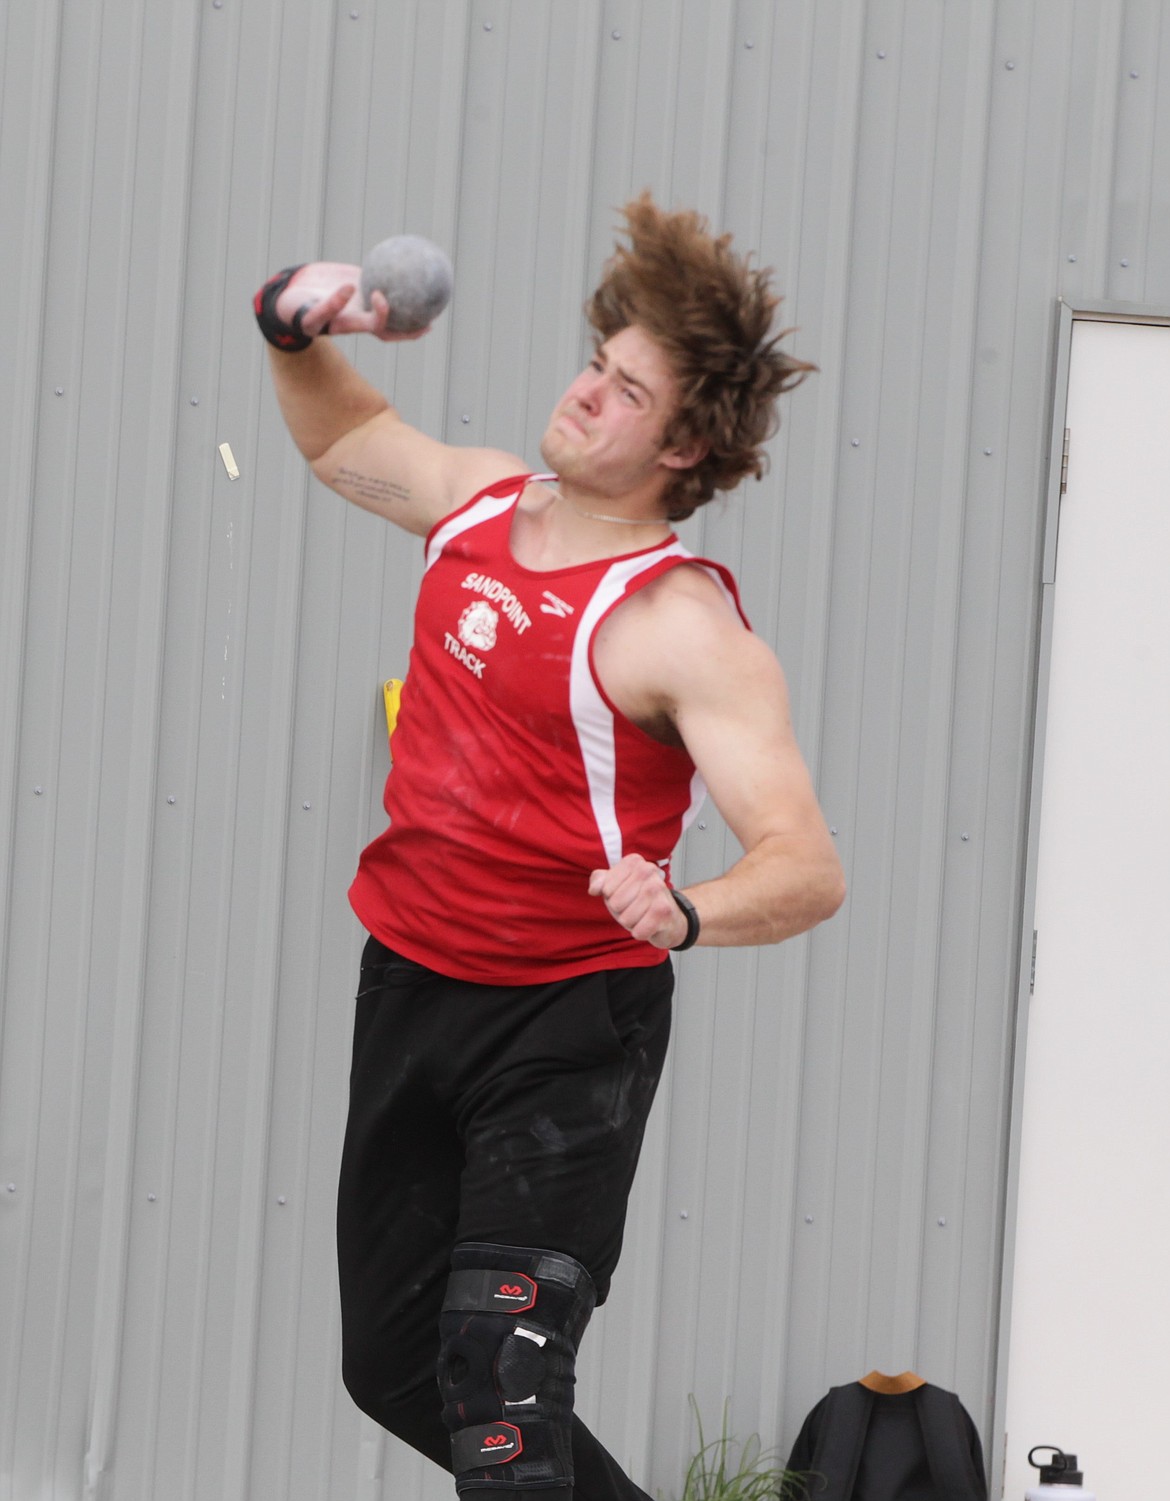 Sandpoint senior Will Hurst winds up for his final throw in the shot put during the 4A Region 1 meet at Coeur d'Alene High. Hurst won the event with a throw of 52 feet, 6 1/2 inches.